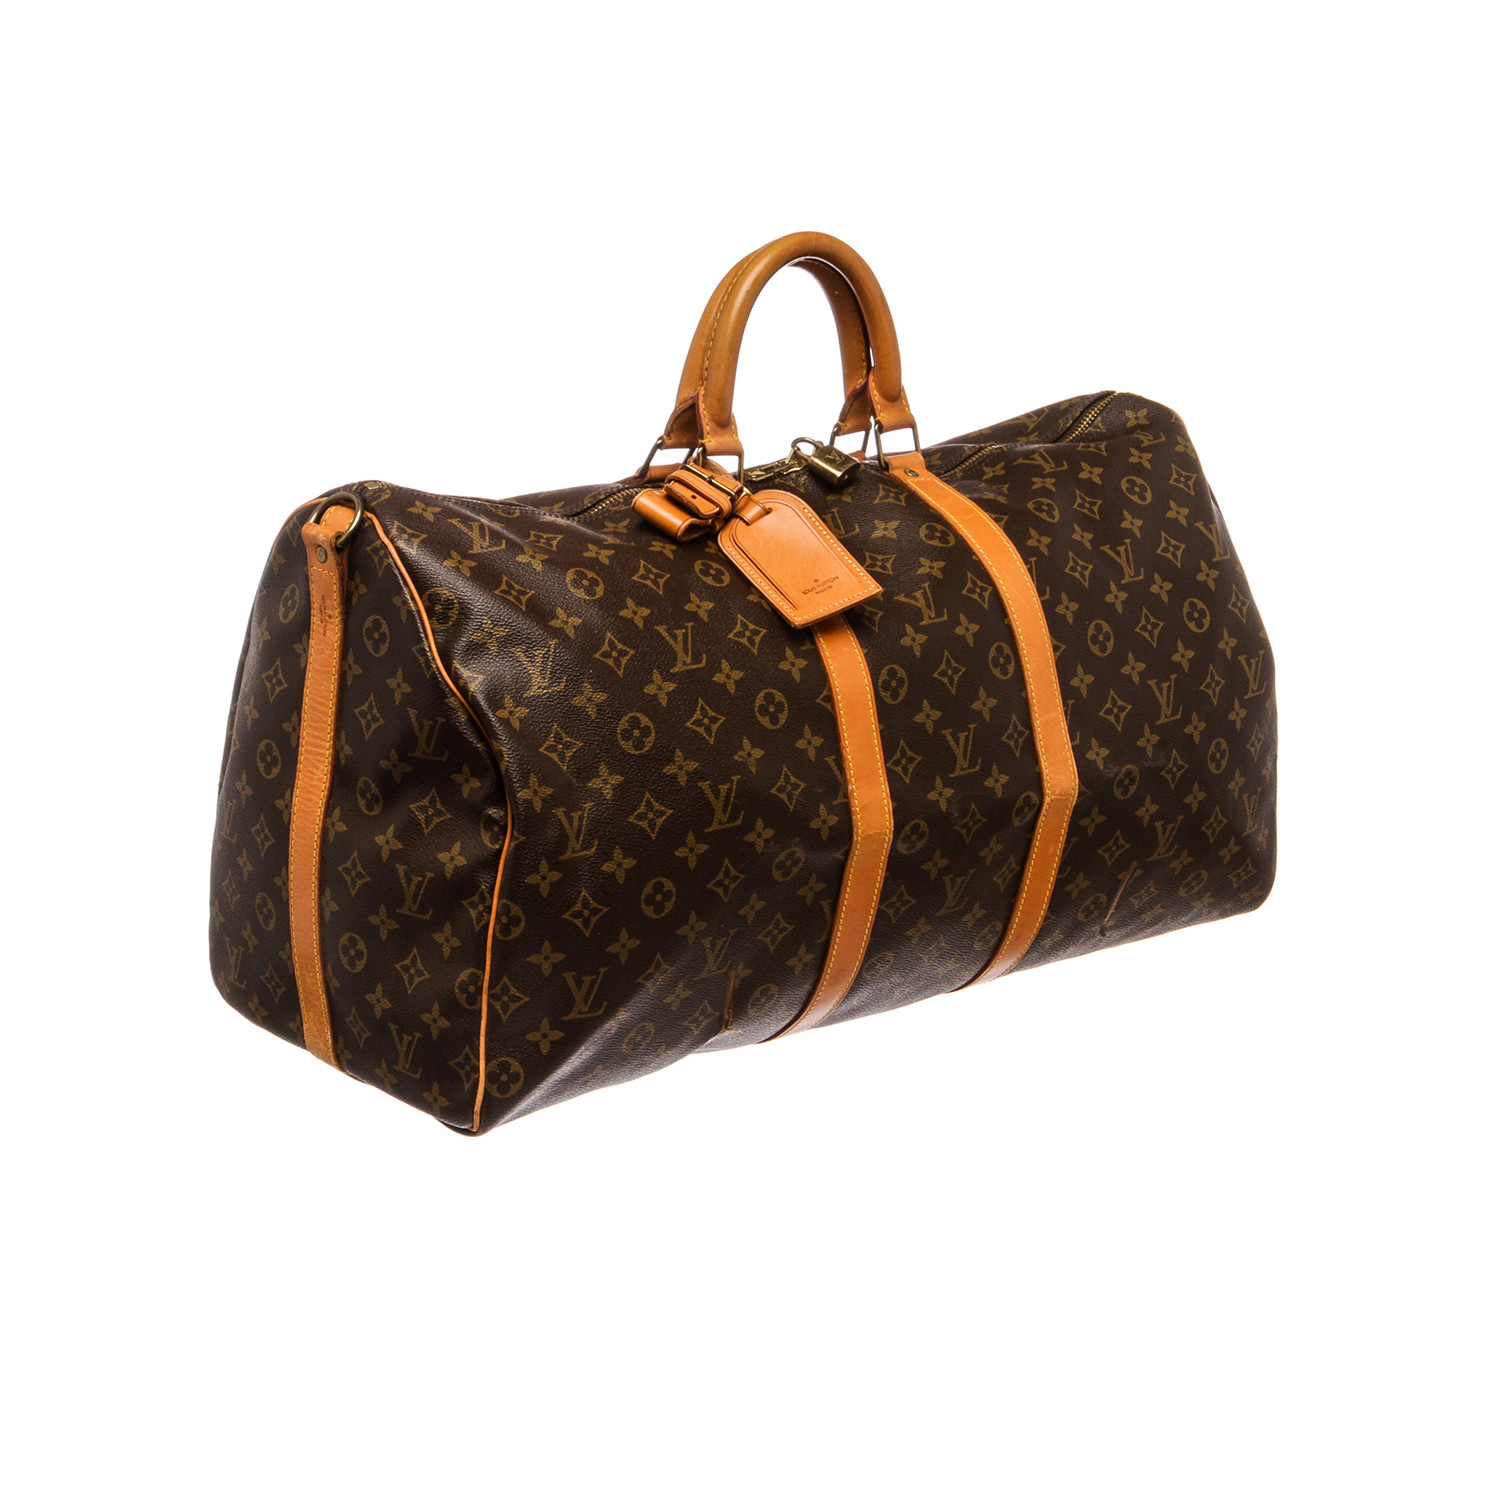 Louis Vuitton Keepall For Sale | Confederated Tribes of the Umatilla Indian Reservation